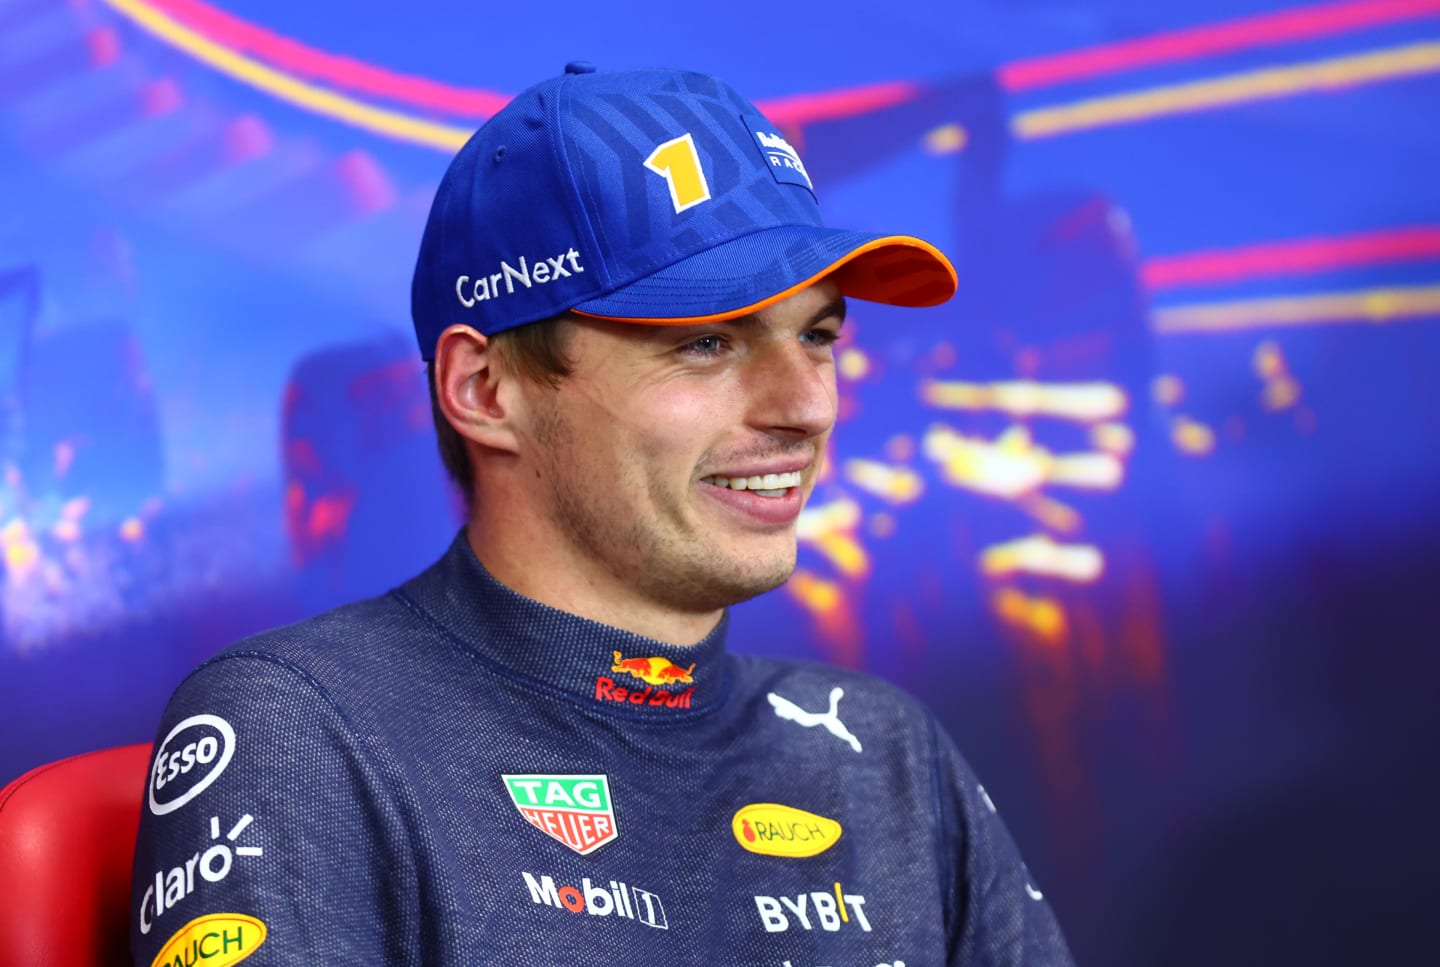 SPA, BELGIUM - AUGUST 27: Pole position qualifier Max Verstappen of the Netherlands and Oracle Red Bull Racing attends the press conference after qualifying ahead of the F1 Grand Prix of Belgium at Circuit de Spa-Francorchamps on August 27, 2022 in Spa, Belgium. (Photo by Dan Istitene/Getty Images)